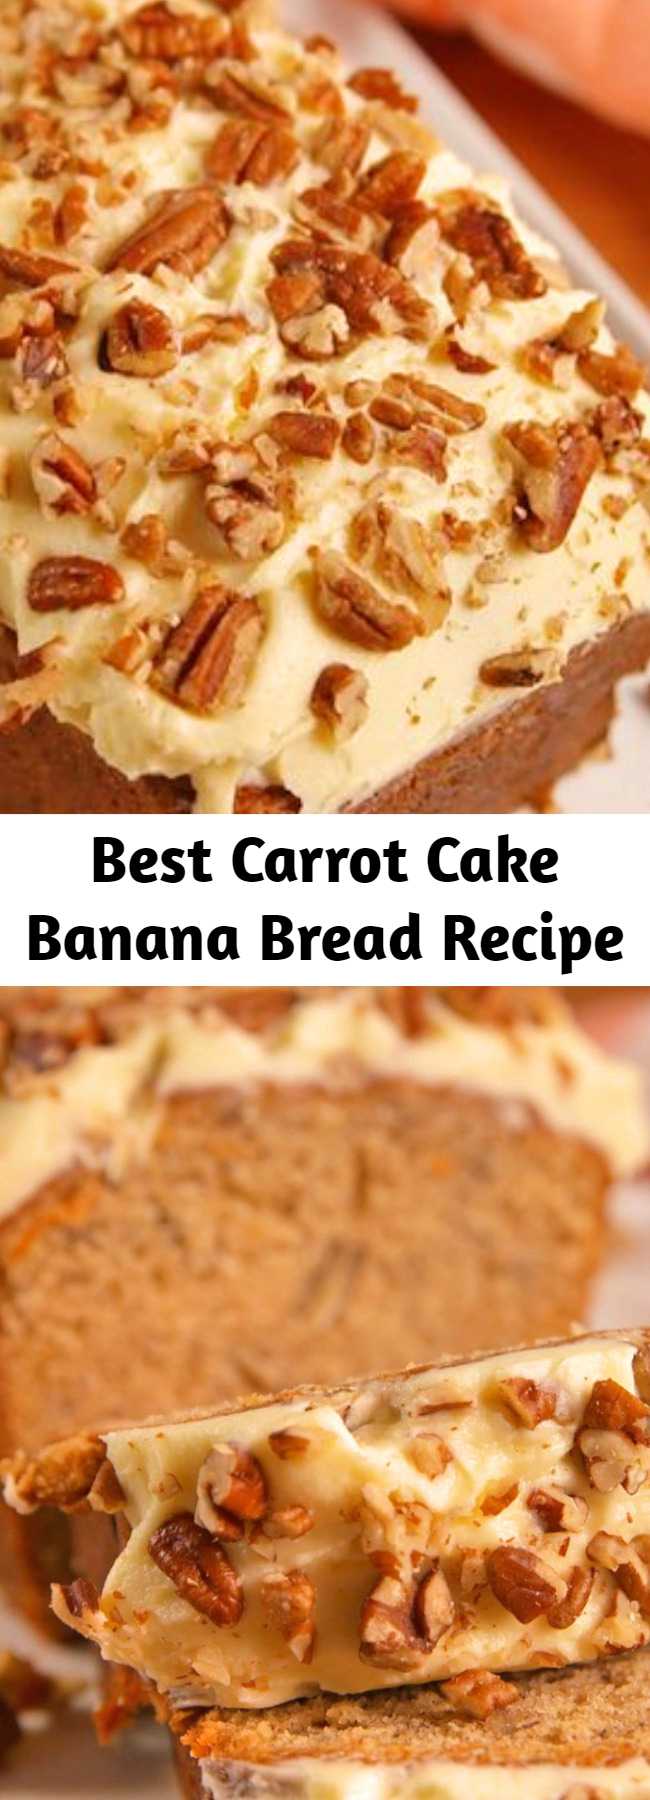 Best Carrot Cake Banana Bread Recipe - Carrot cake banana bread is the best of both baking worlds. #easy #recipe #carrotcake #bananabread #creamcheese #icing #frosting #breakfastrecipes #brunchrecipes #brunch #baking